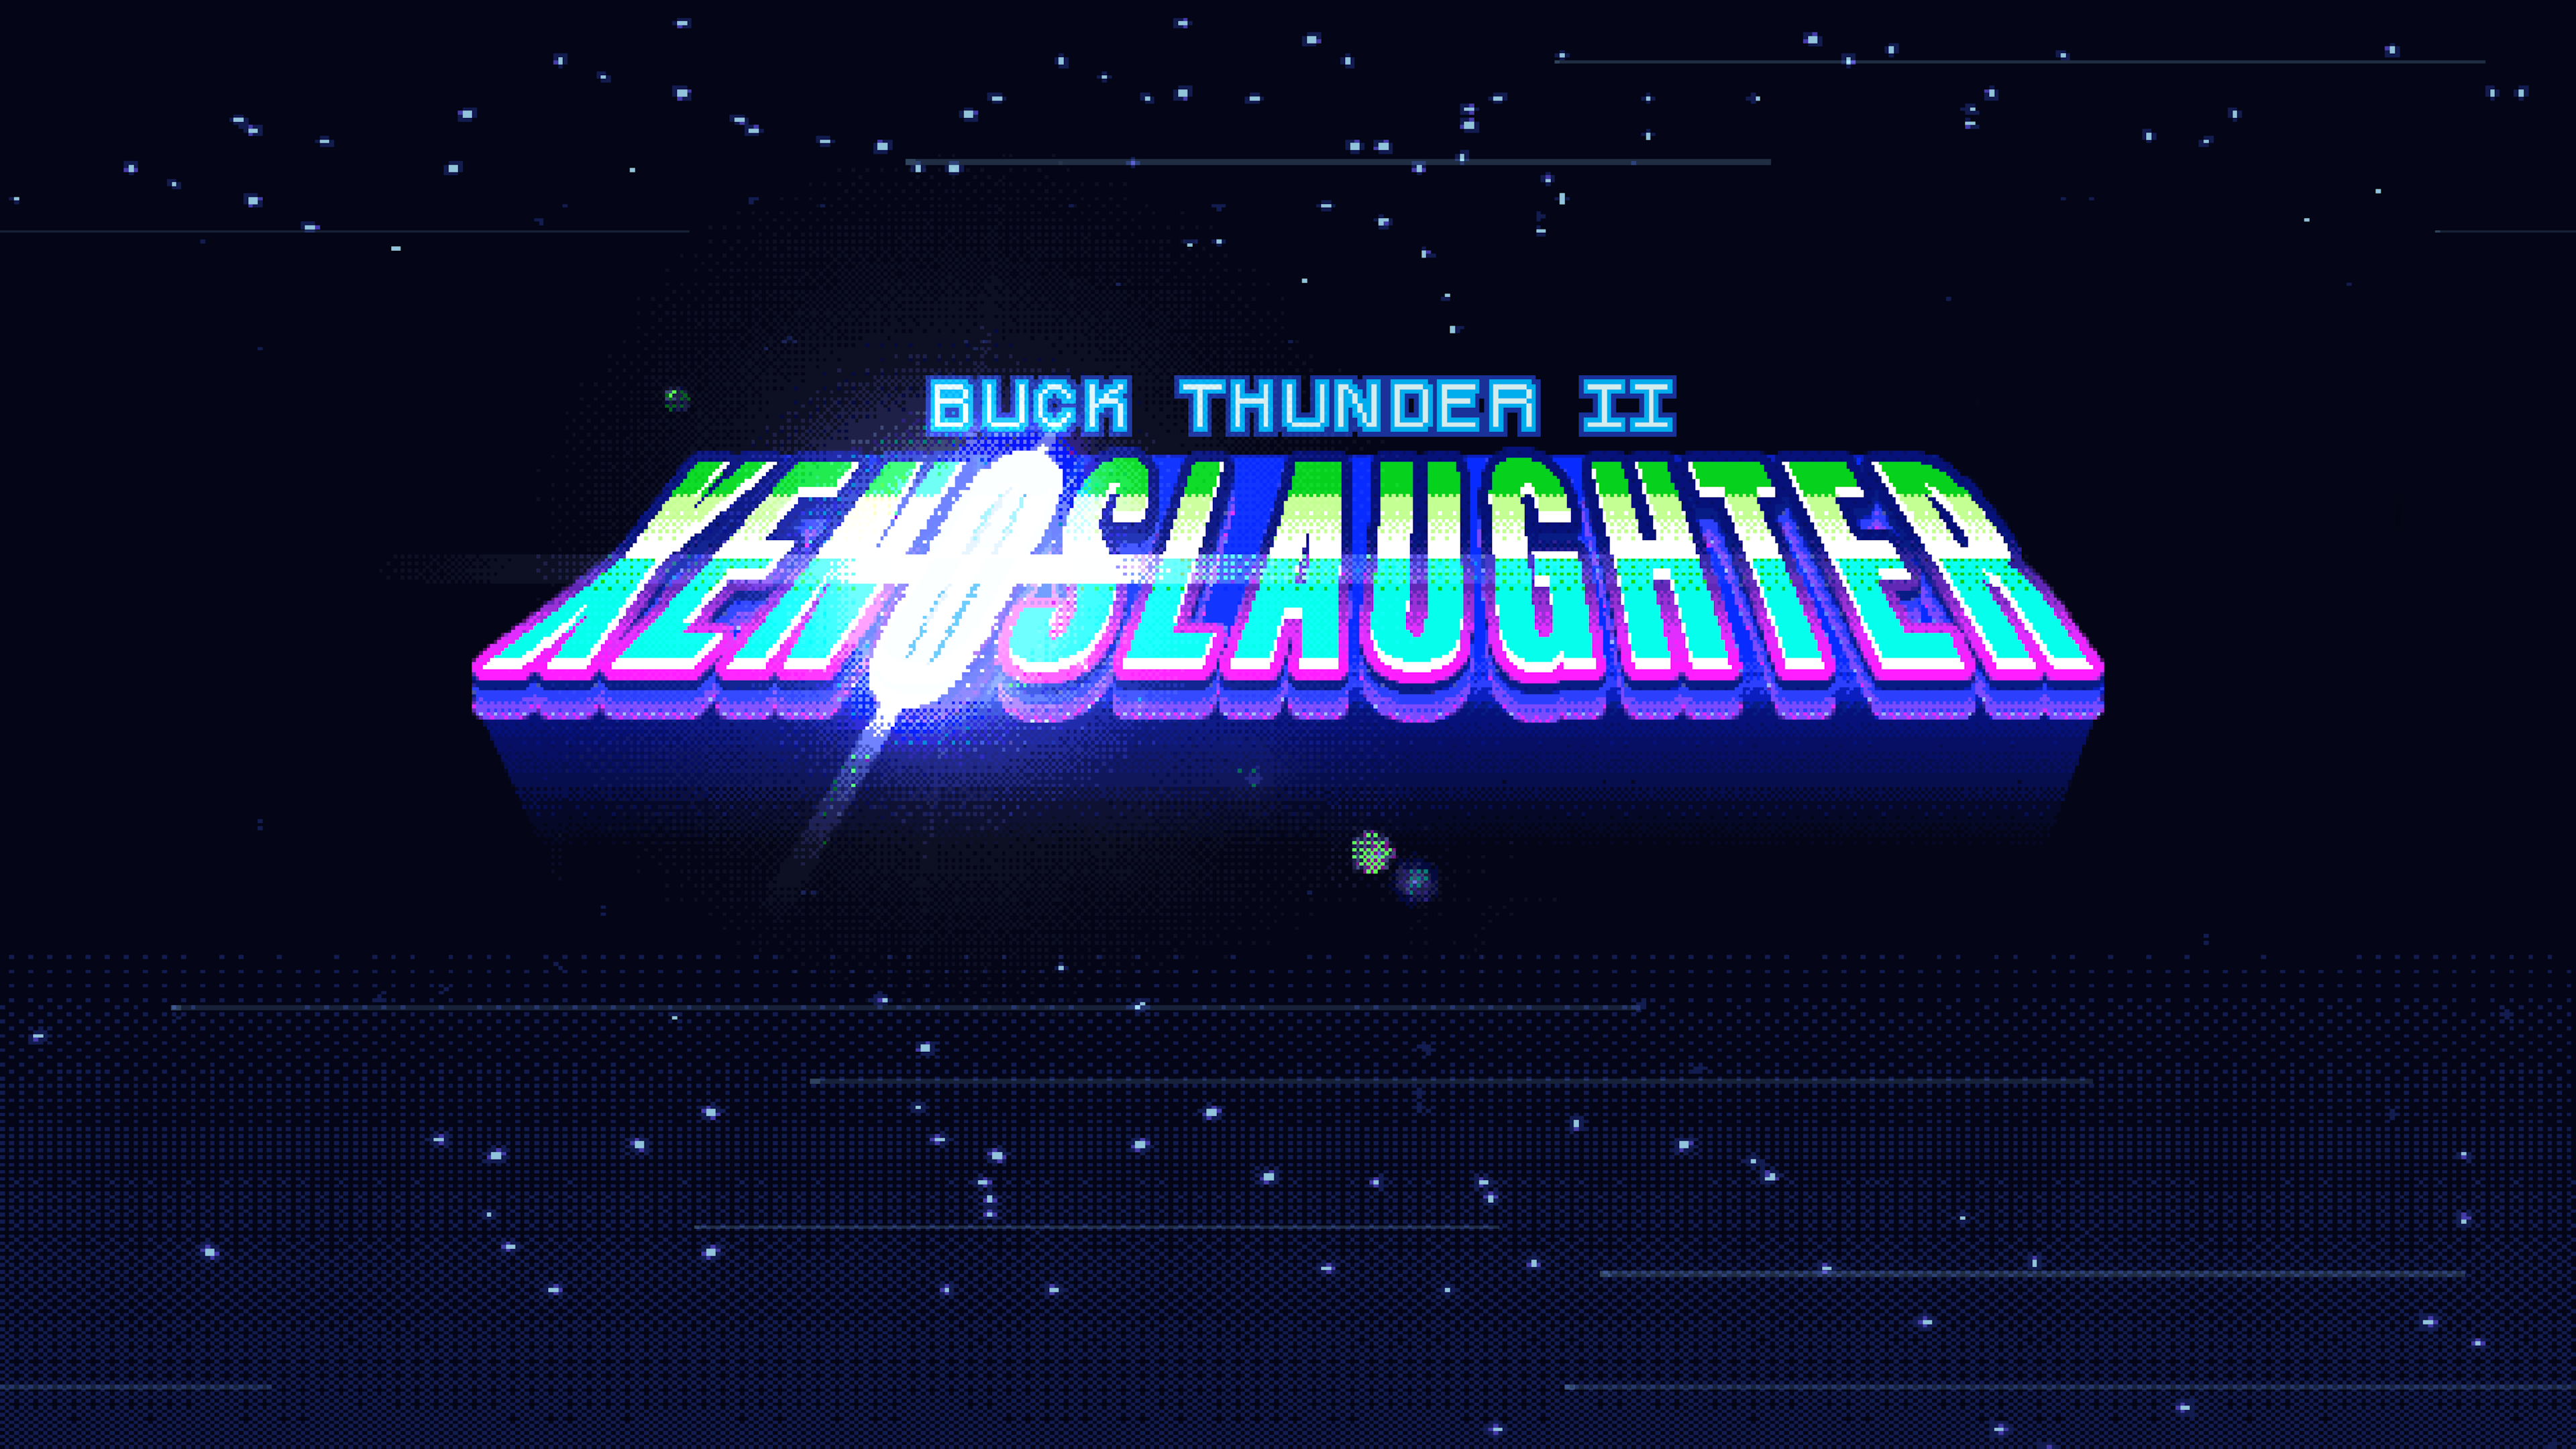 General 3840x2160 video games Buck Thunder arcade  dark background high on life Xenoslaughter pixel art pixelated retro games retro style PlayStation Xbox